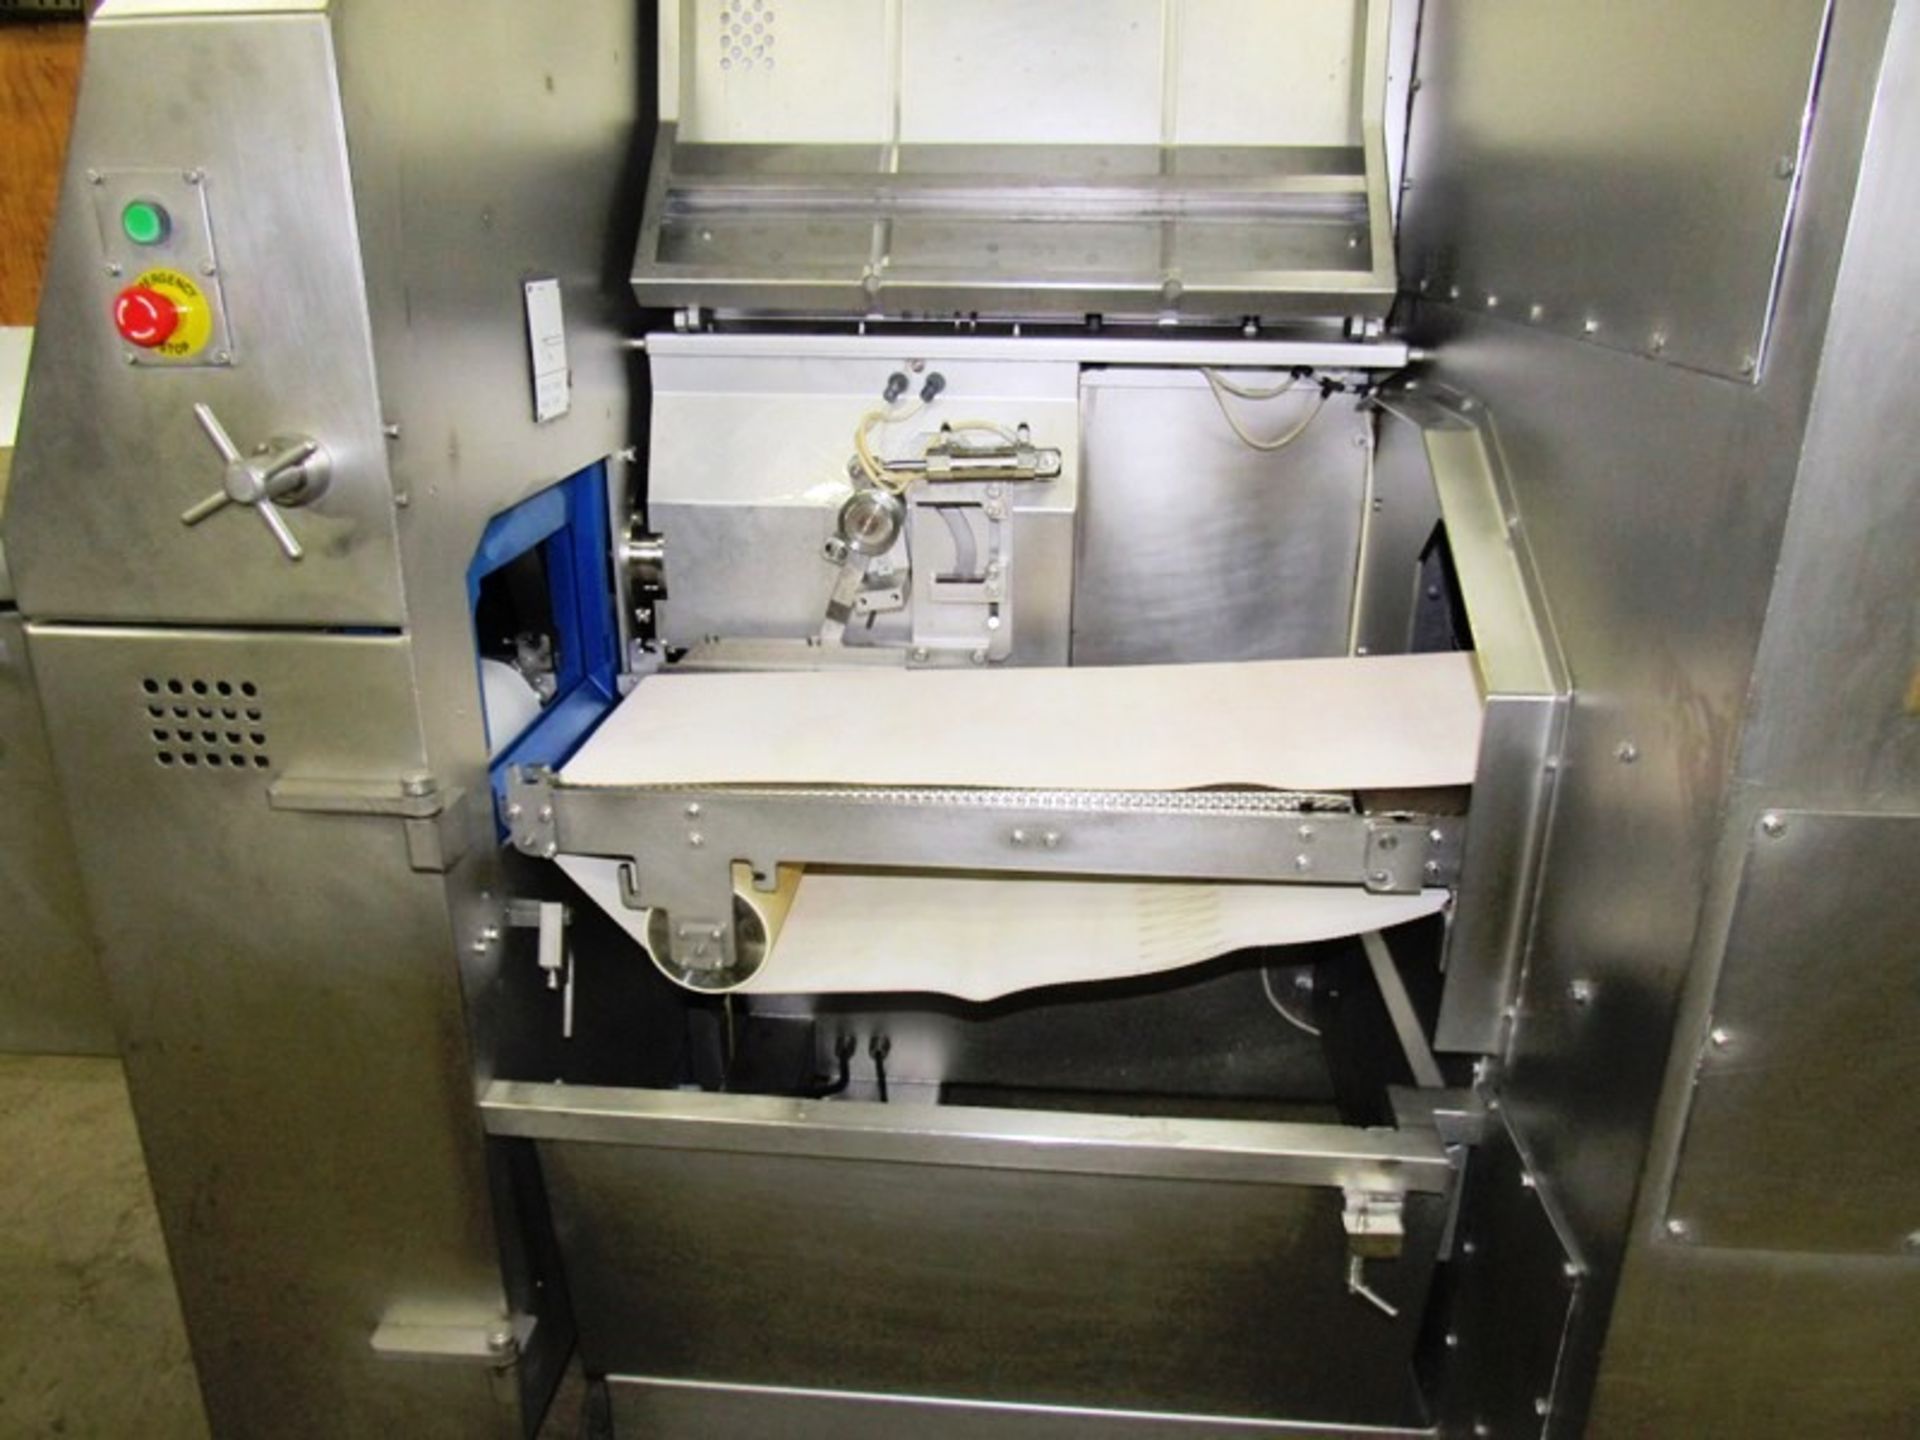 AEW Delford Mdl. SSV Vision Slicer for fresh, non frozen meats, equipped with (3) digital - Bild 13 aus 17